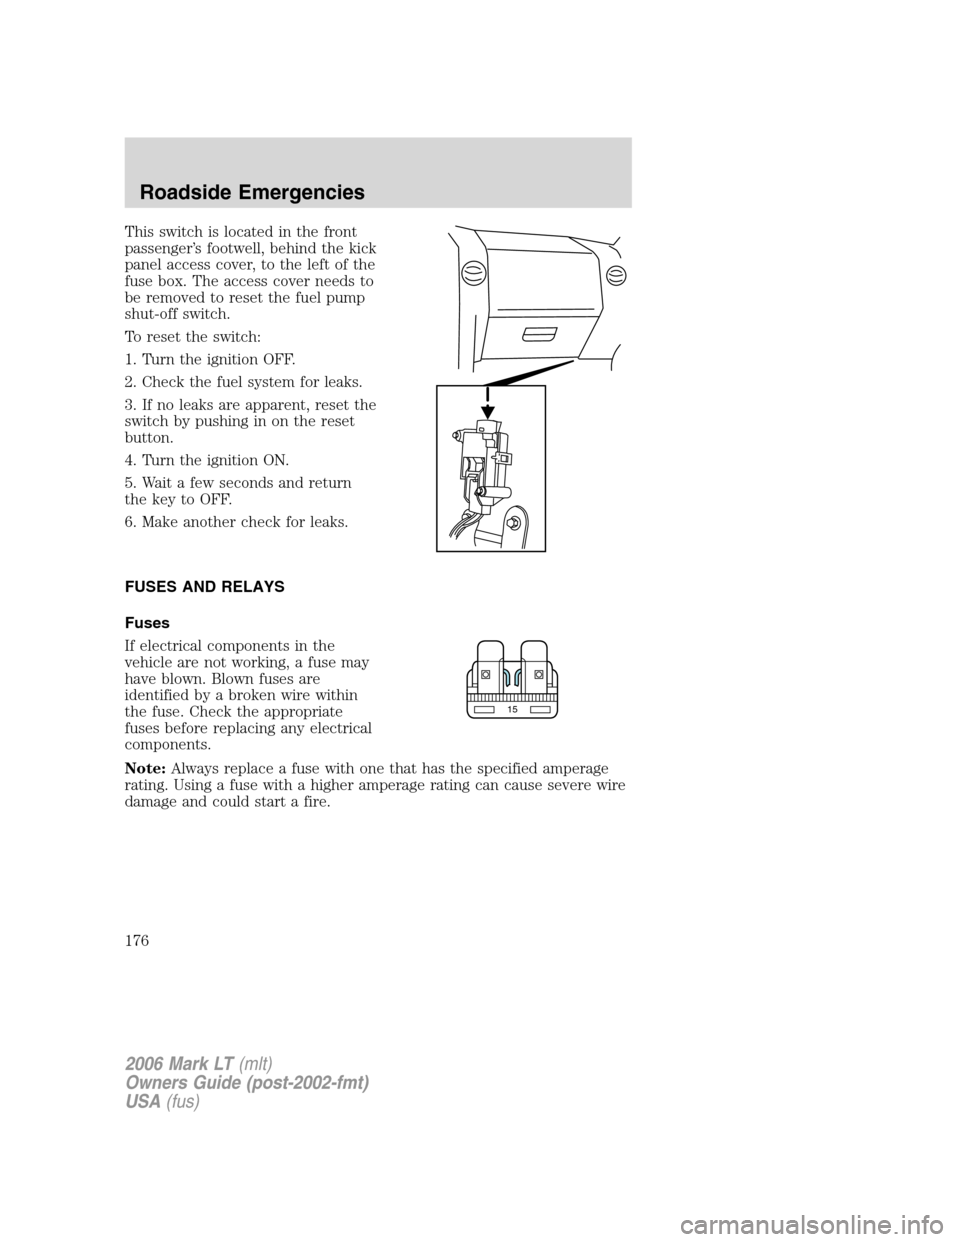 LINCOLN MARK LT 2006  Owners Manual This switch is located in the front
passenger’s footwell, behind the kick
panel access cover, to the left of the
fuse box. The access cover needs to
be removed to reset the fuel pump
shut-off switch